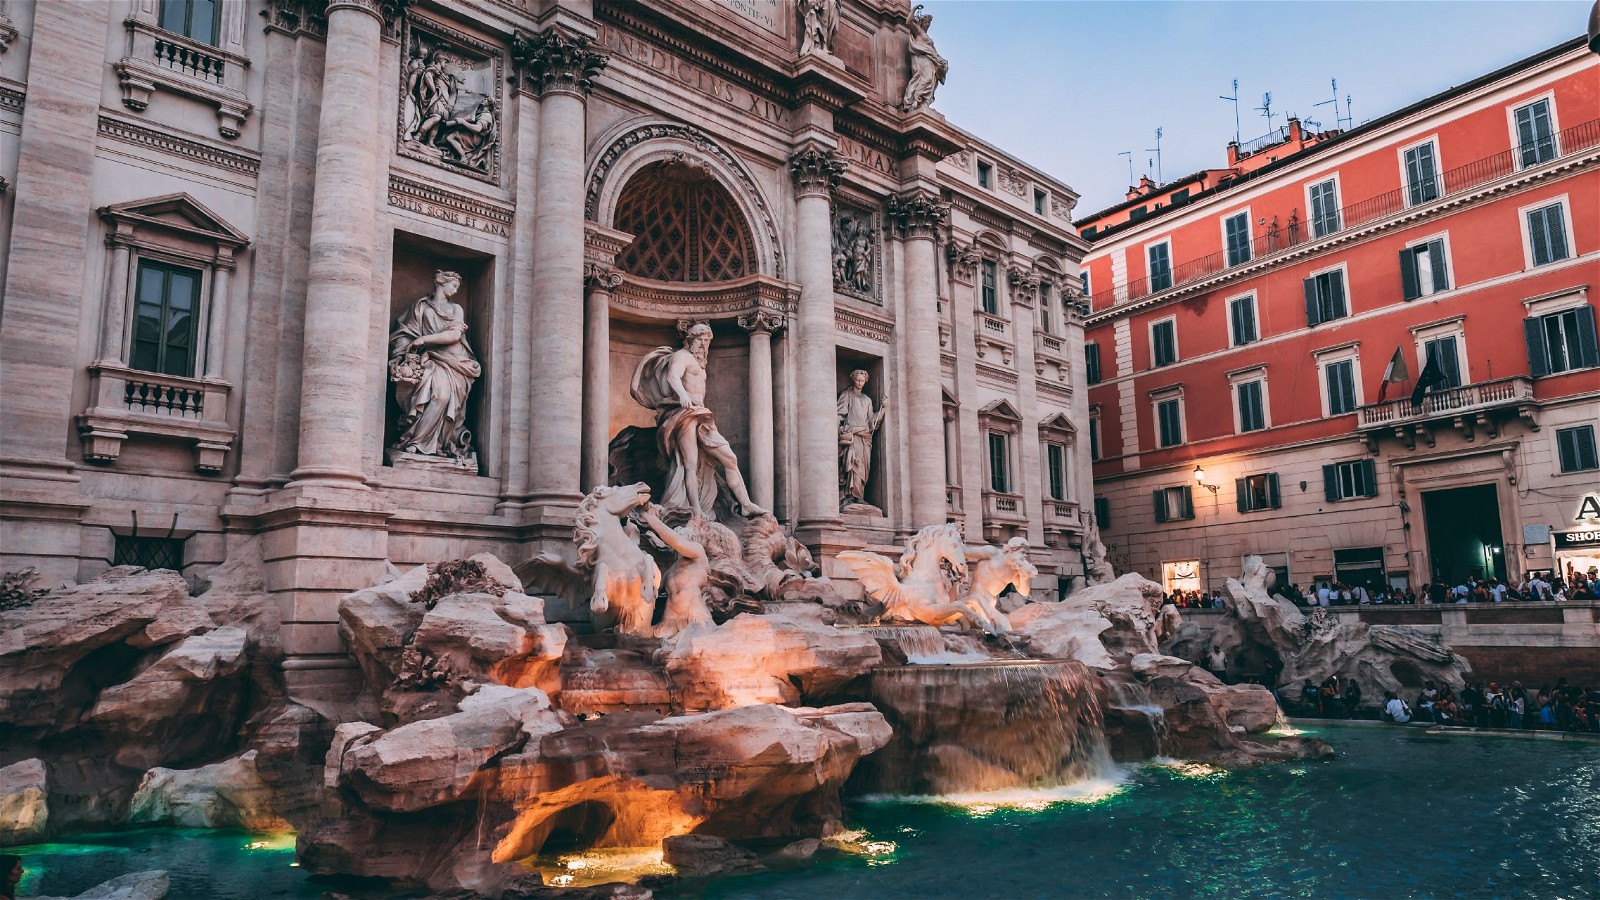 Trevi Fountain: One of Rome's most famous fountains is the Trevi Fountain, built in the 18th century.